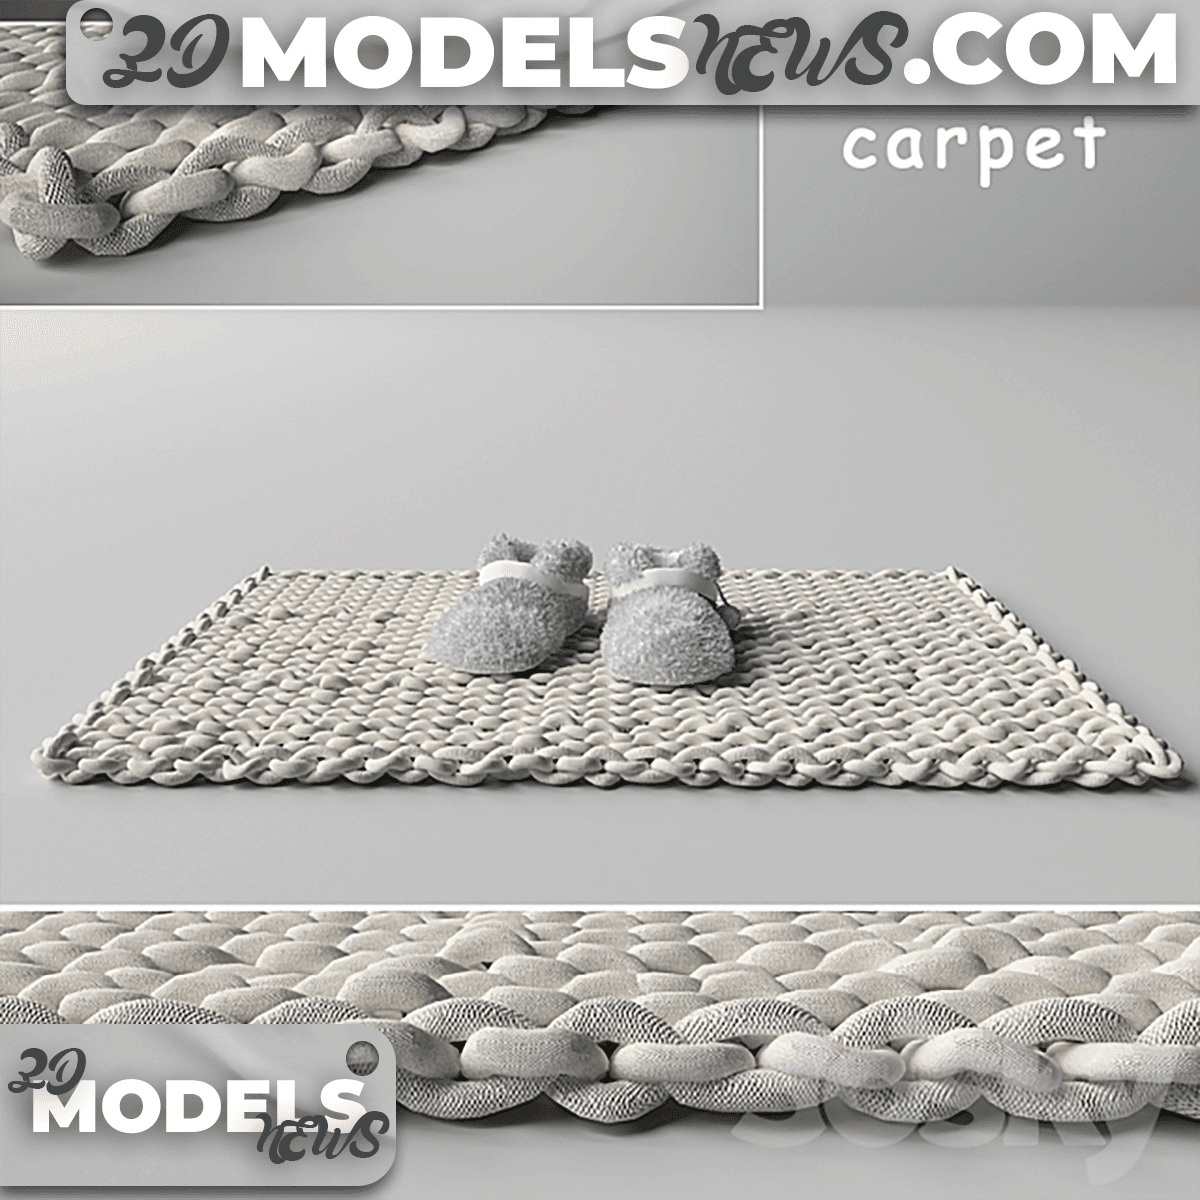 Carpet and slippers model 1